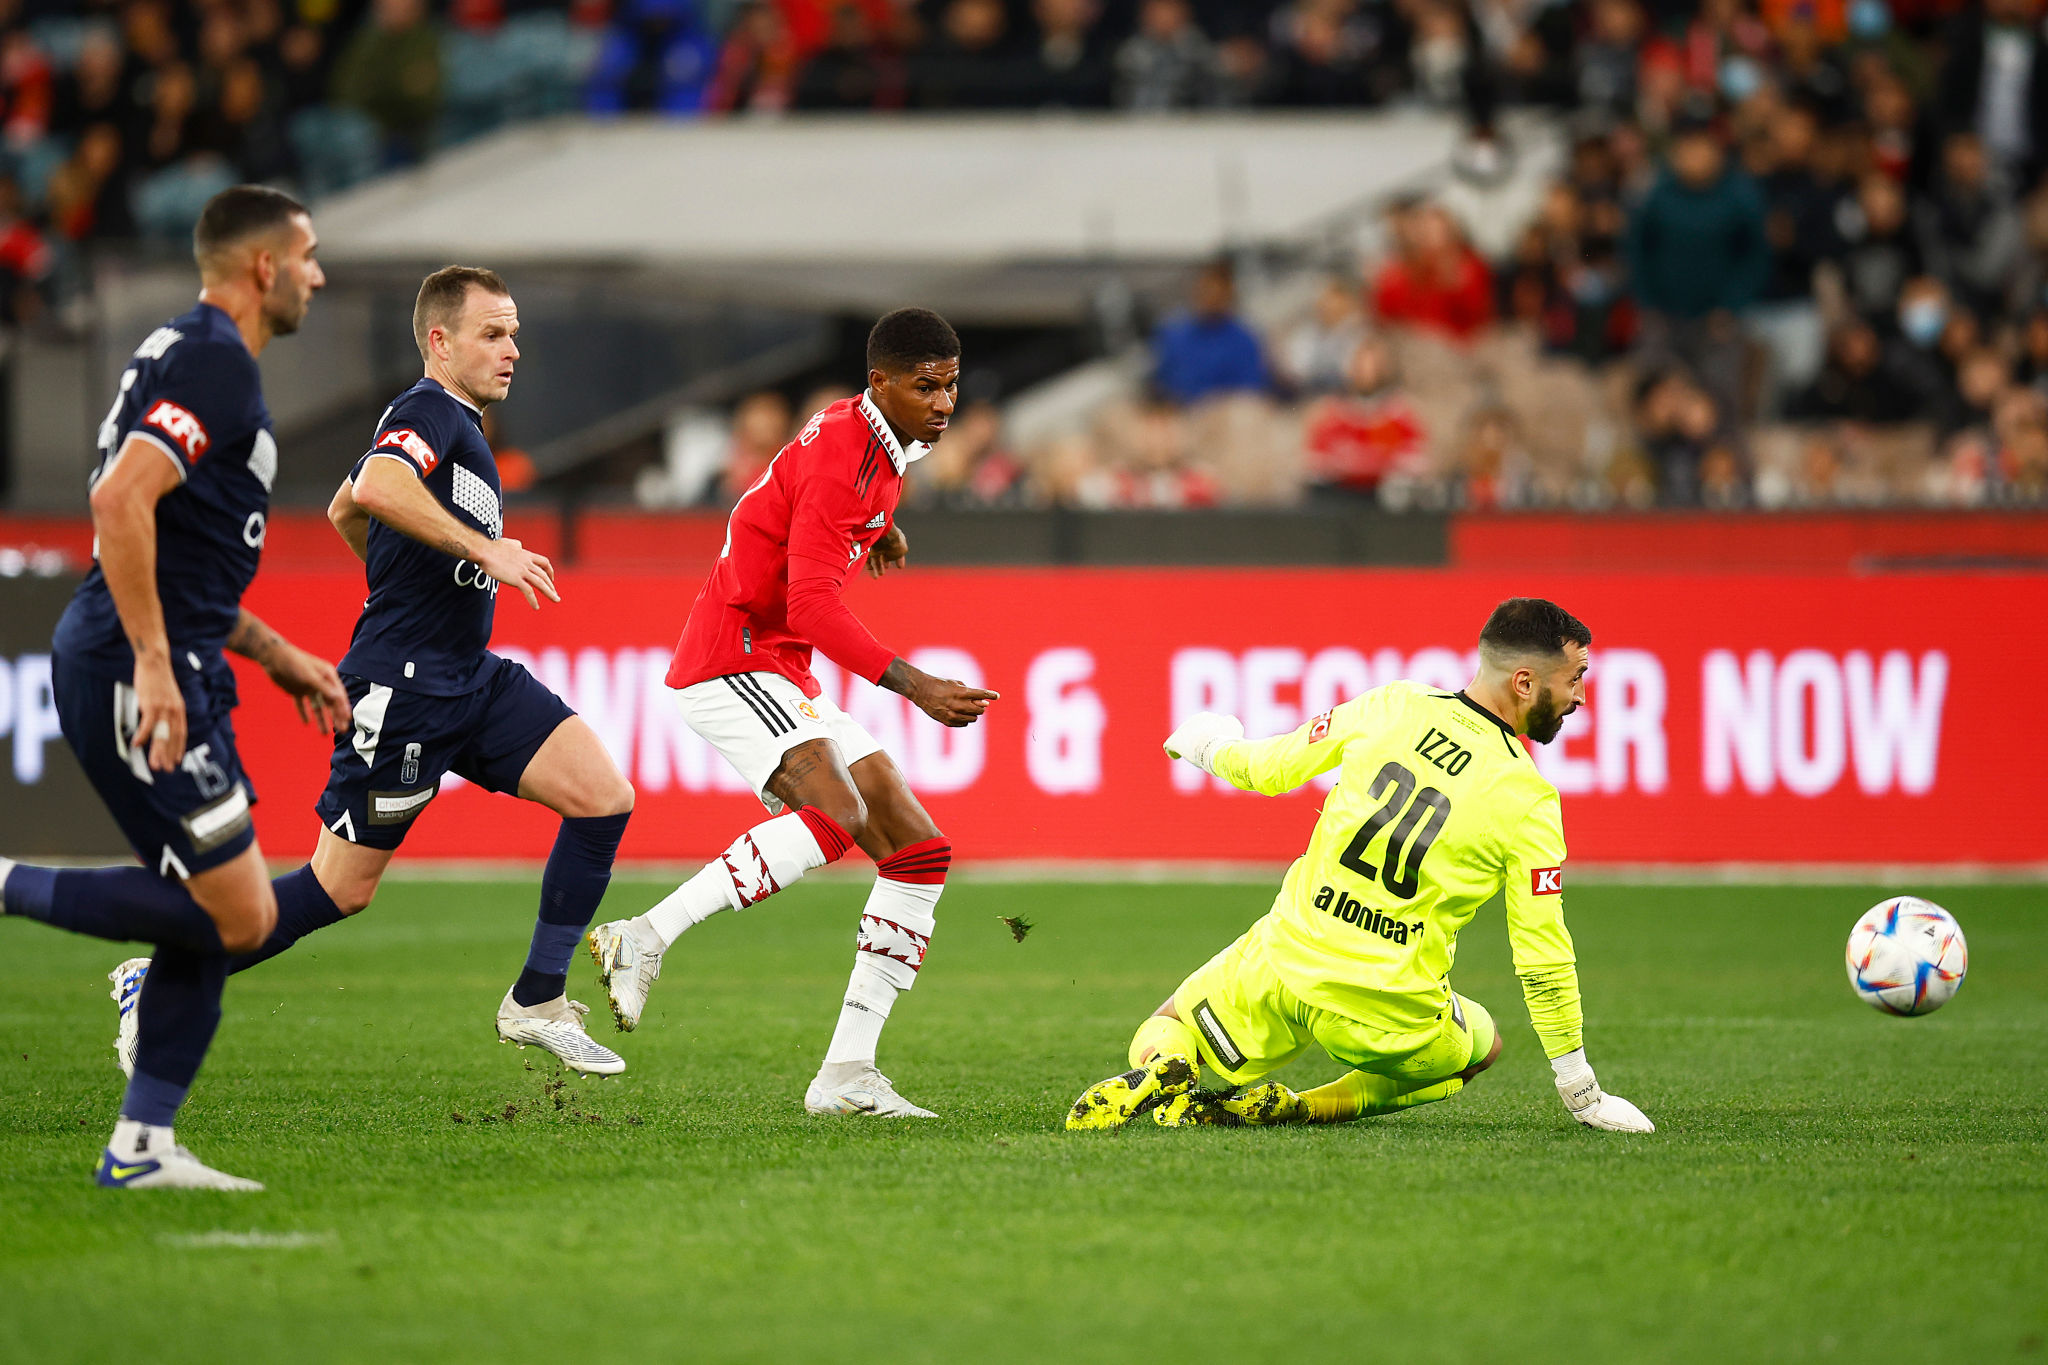 Melbourne Victory vs Man United LIVE: United wins 4-1: Goals from Martial,  McTominay and Rashford seal victory, HIGHLIGHTS